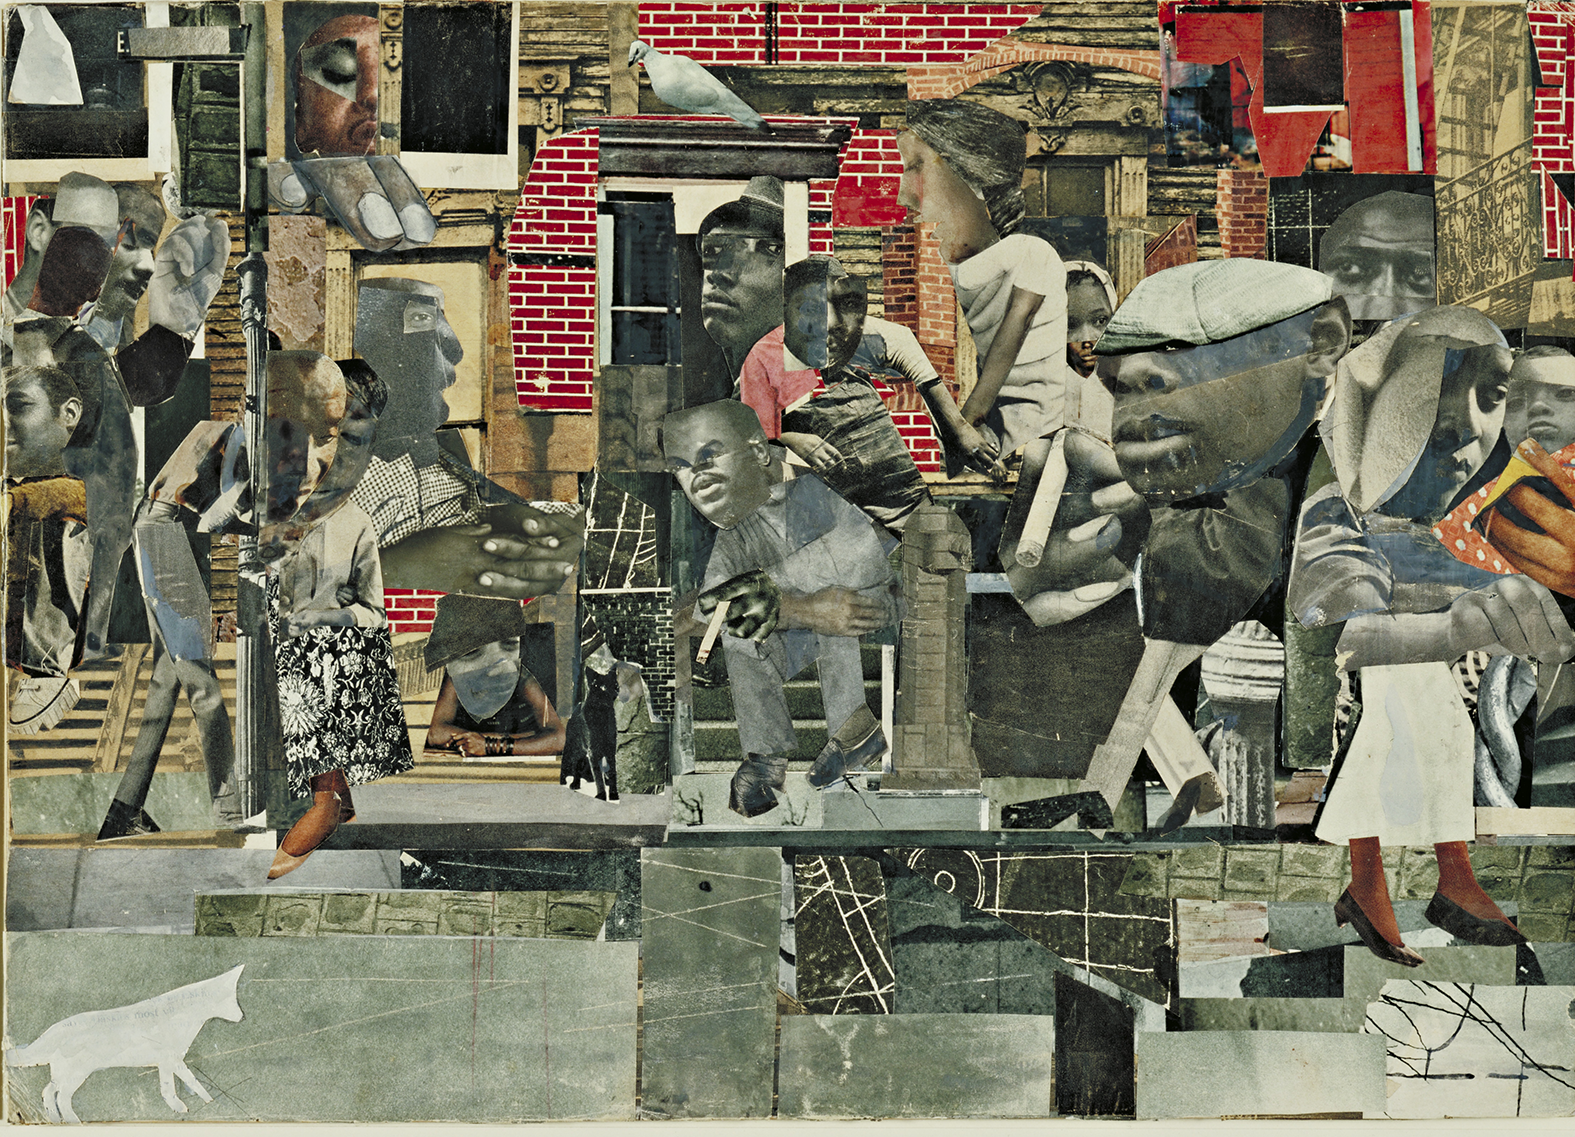 A collage depicting a busy street scene in a city.